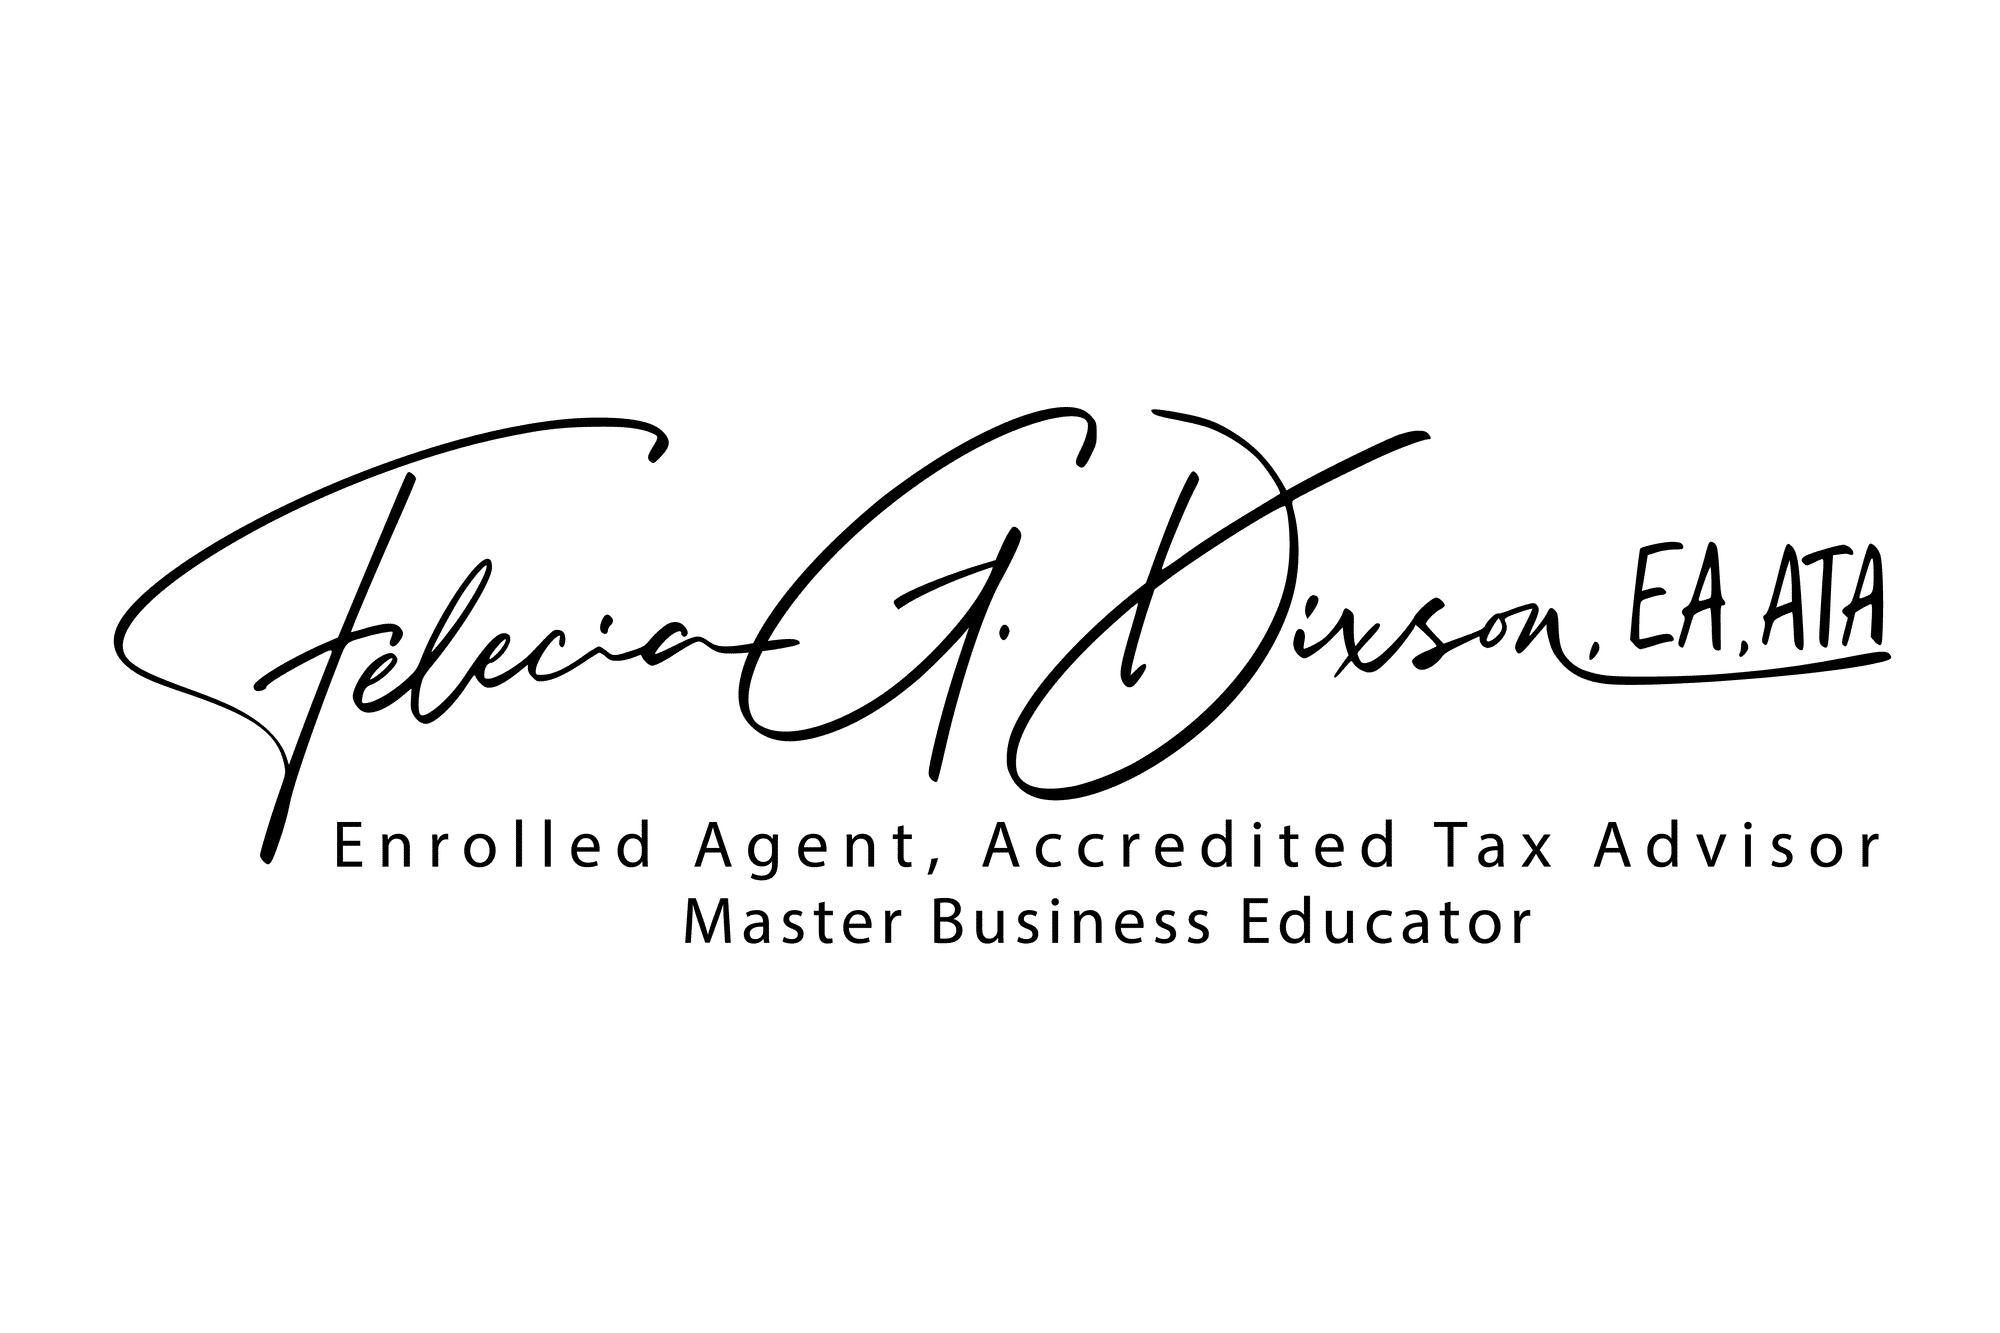 IRS and State Tax Preparation, Tax Resolution Specialist & Master Business Educator.